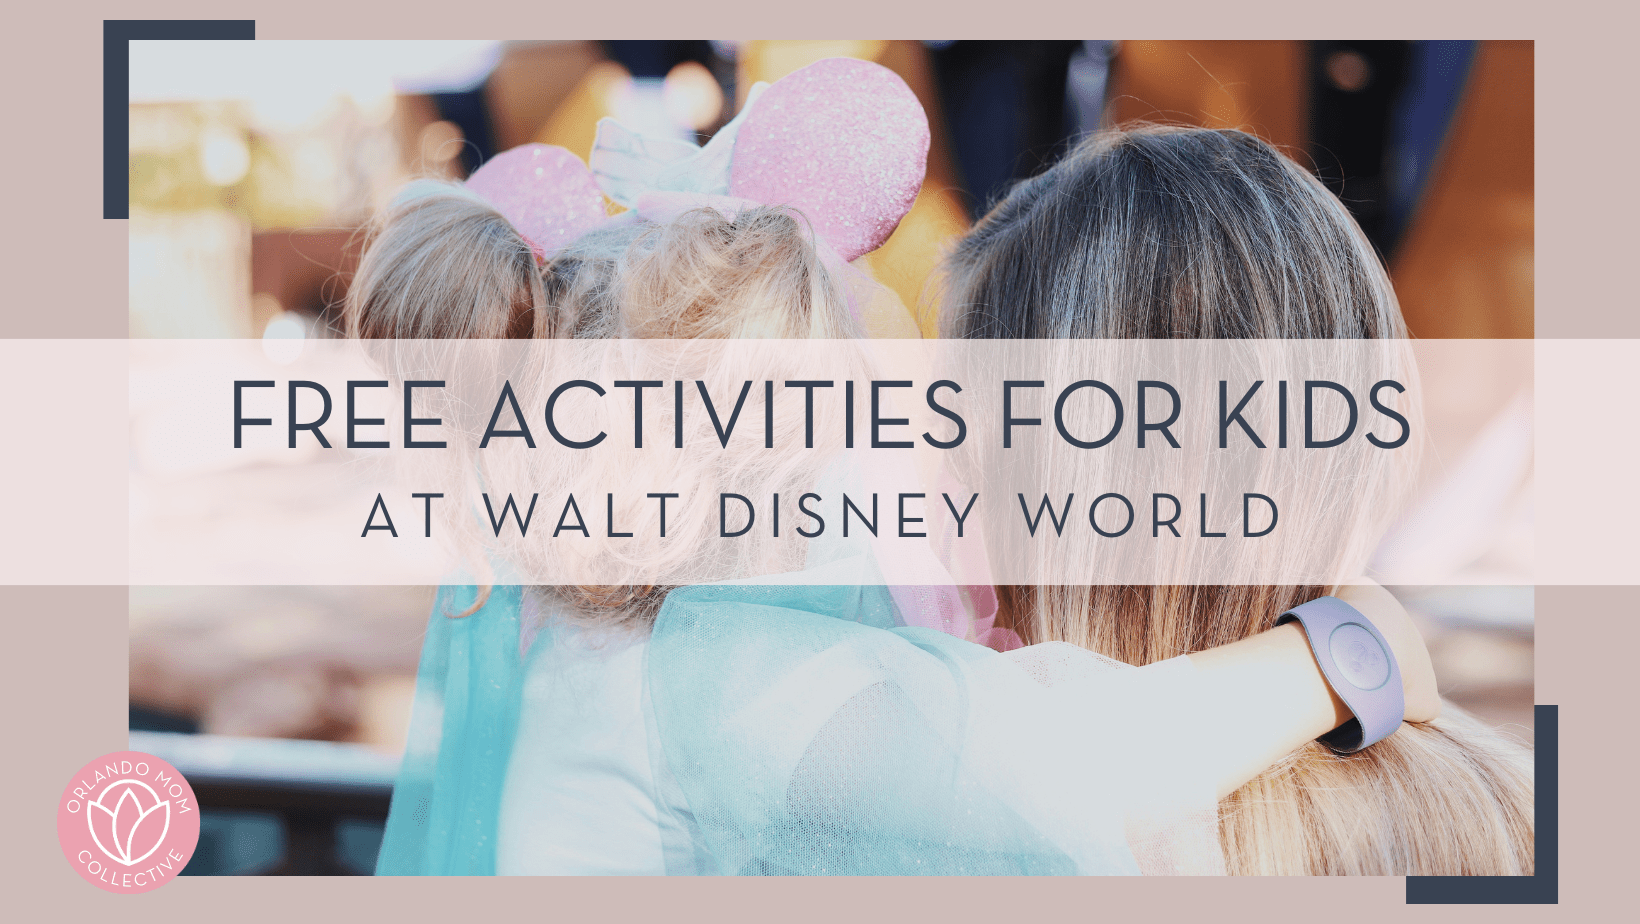 Amy humphries via unsplash photo of a mom and daughter looking away from camera, girl with Minnie ears on her head and words ' free activities at Walt disney world' over top